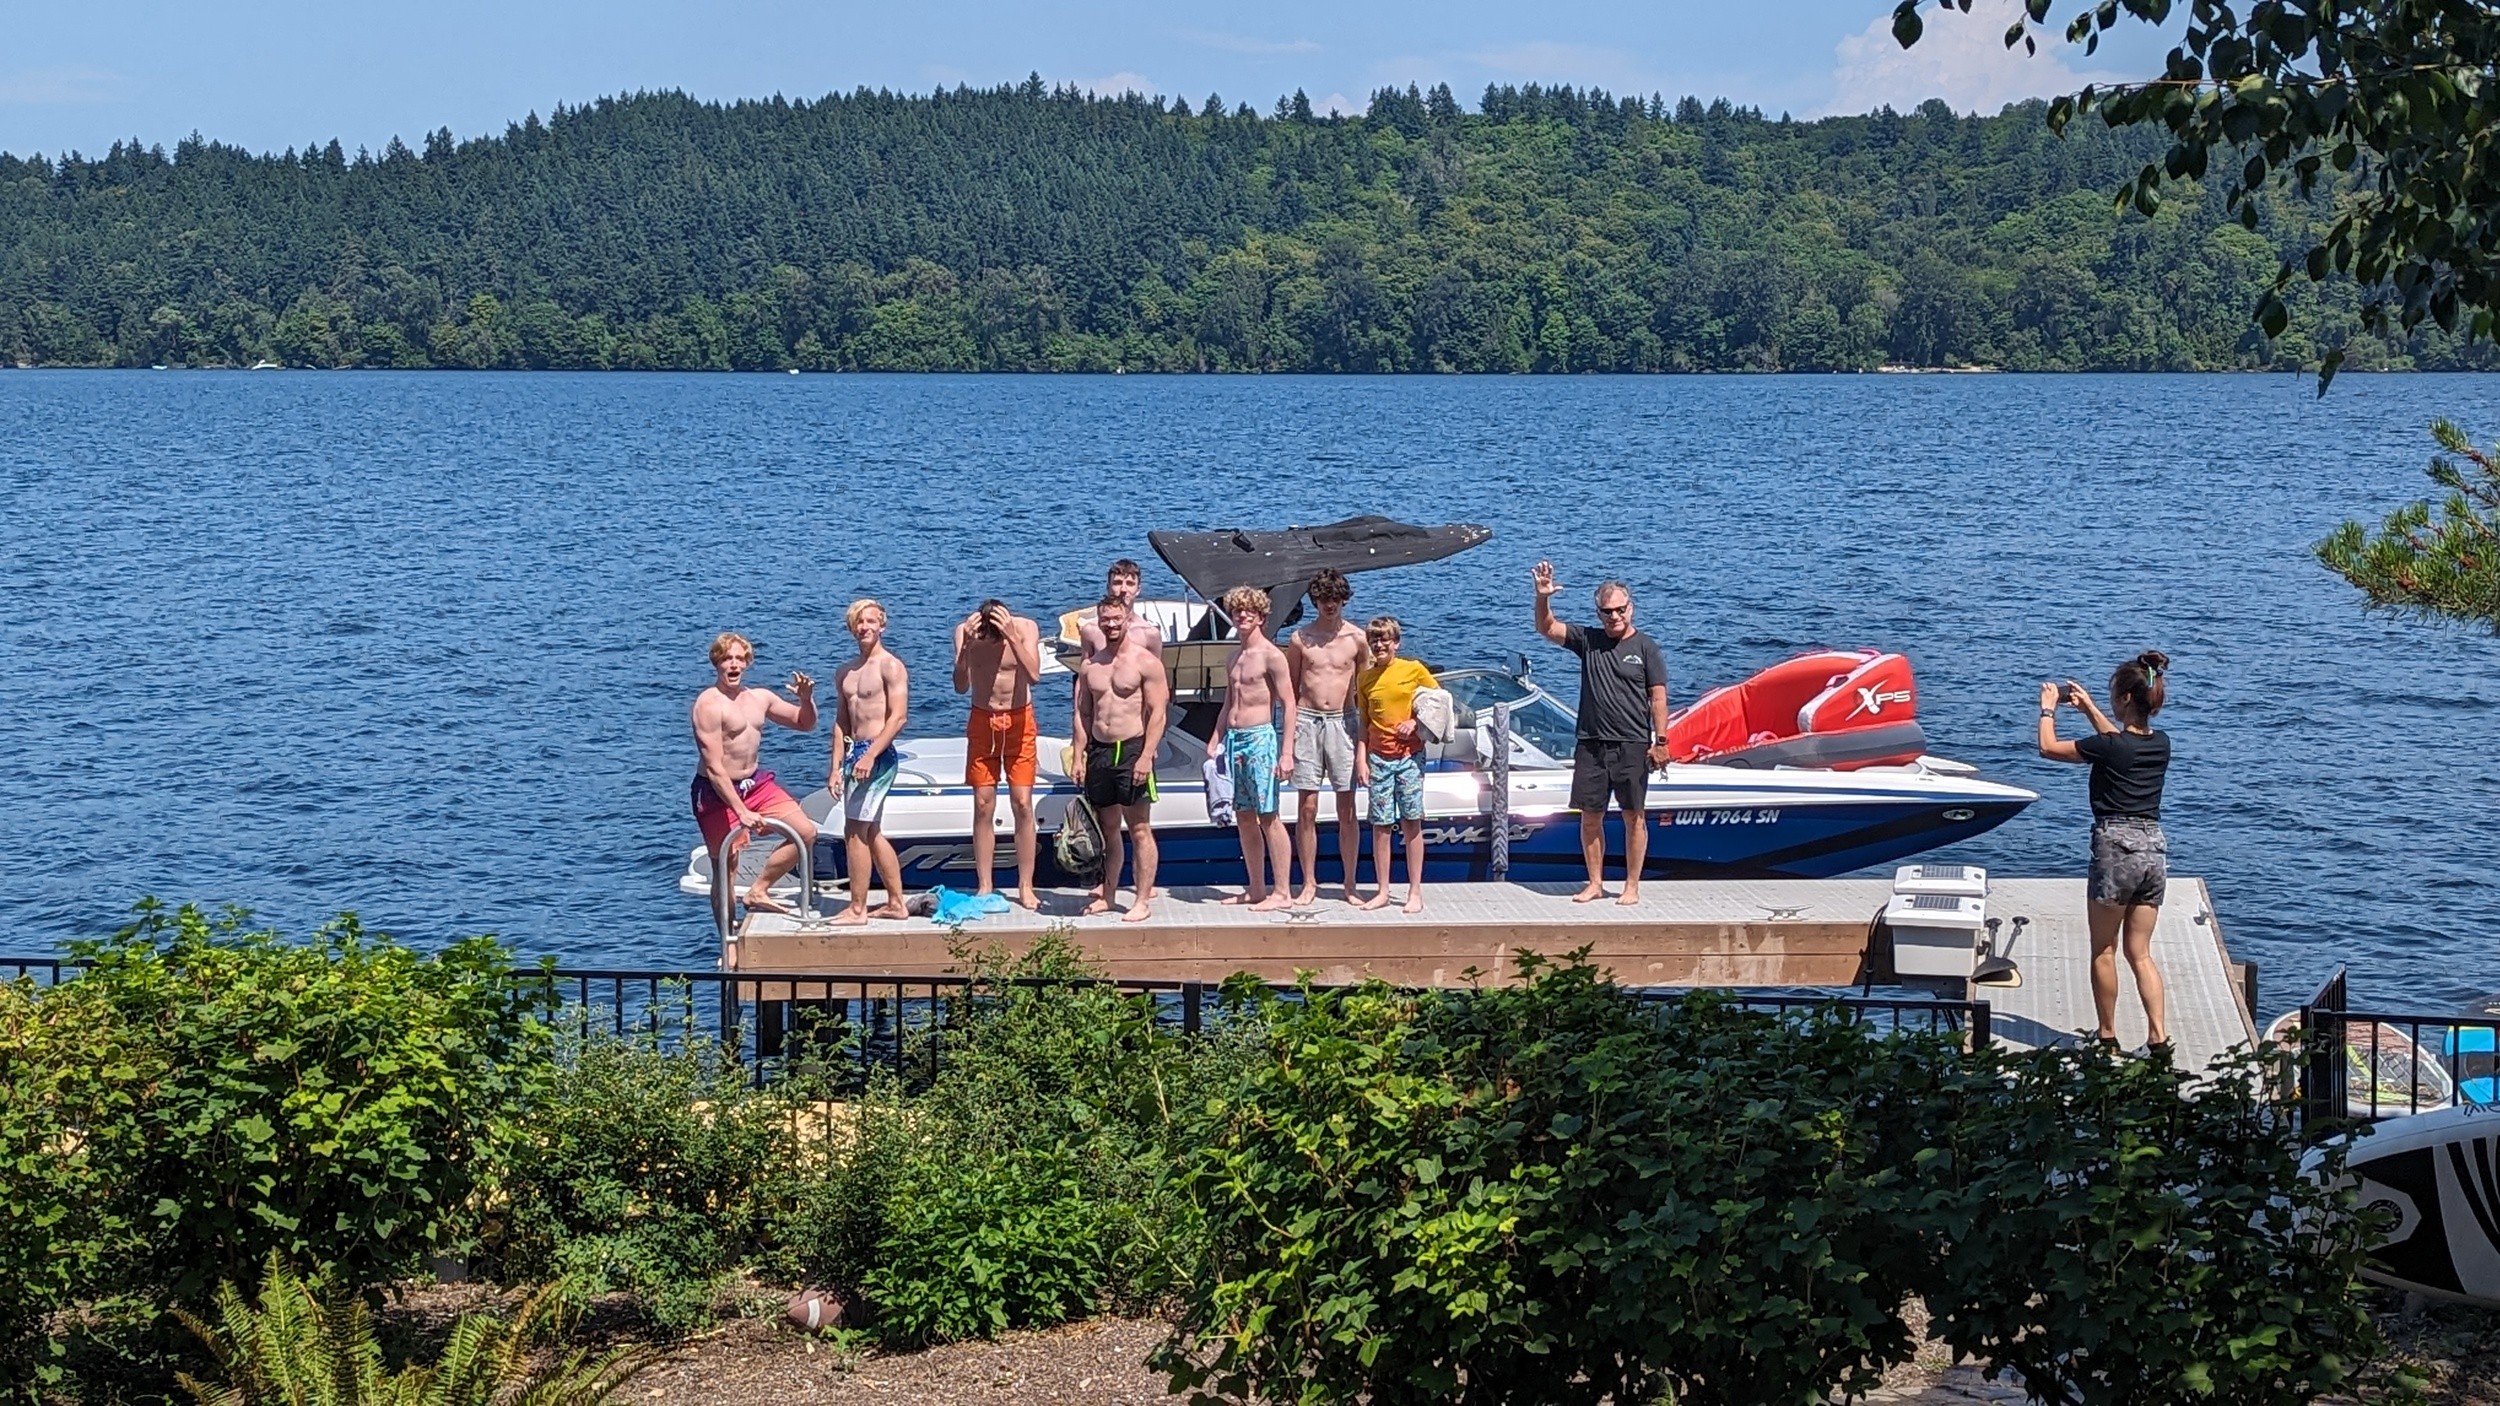 northwest youth group, teens next to a boat